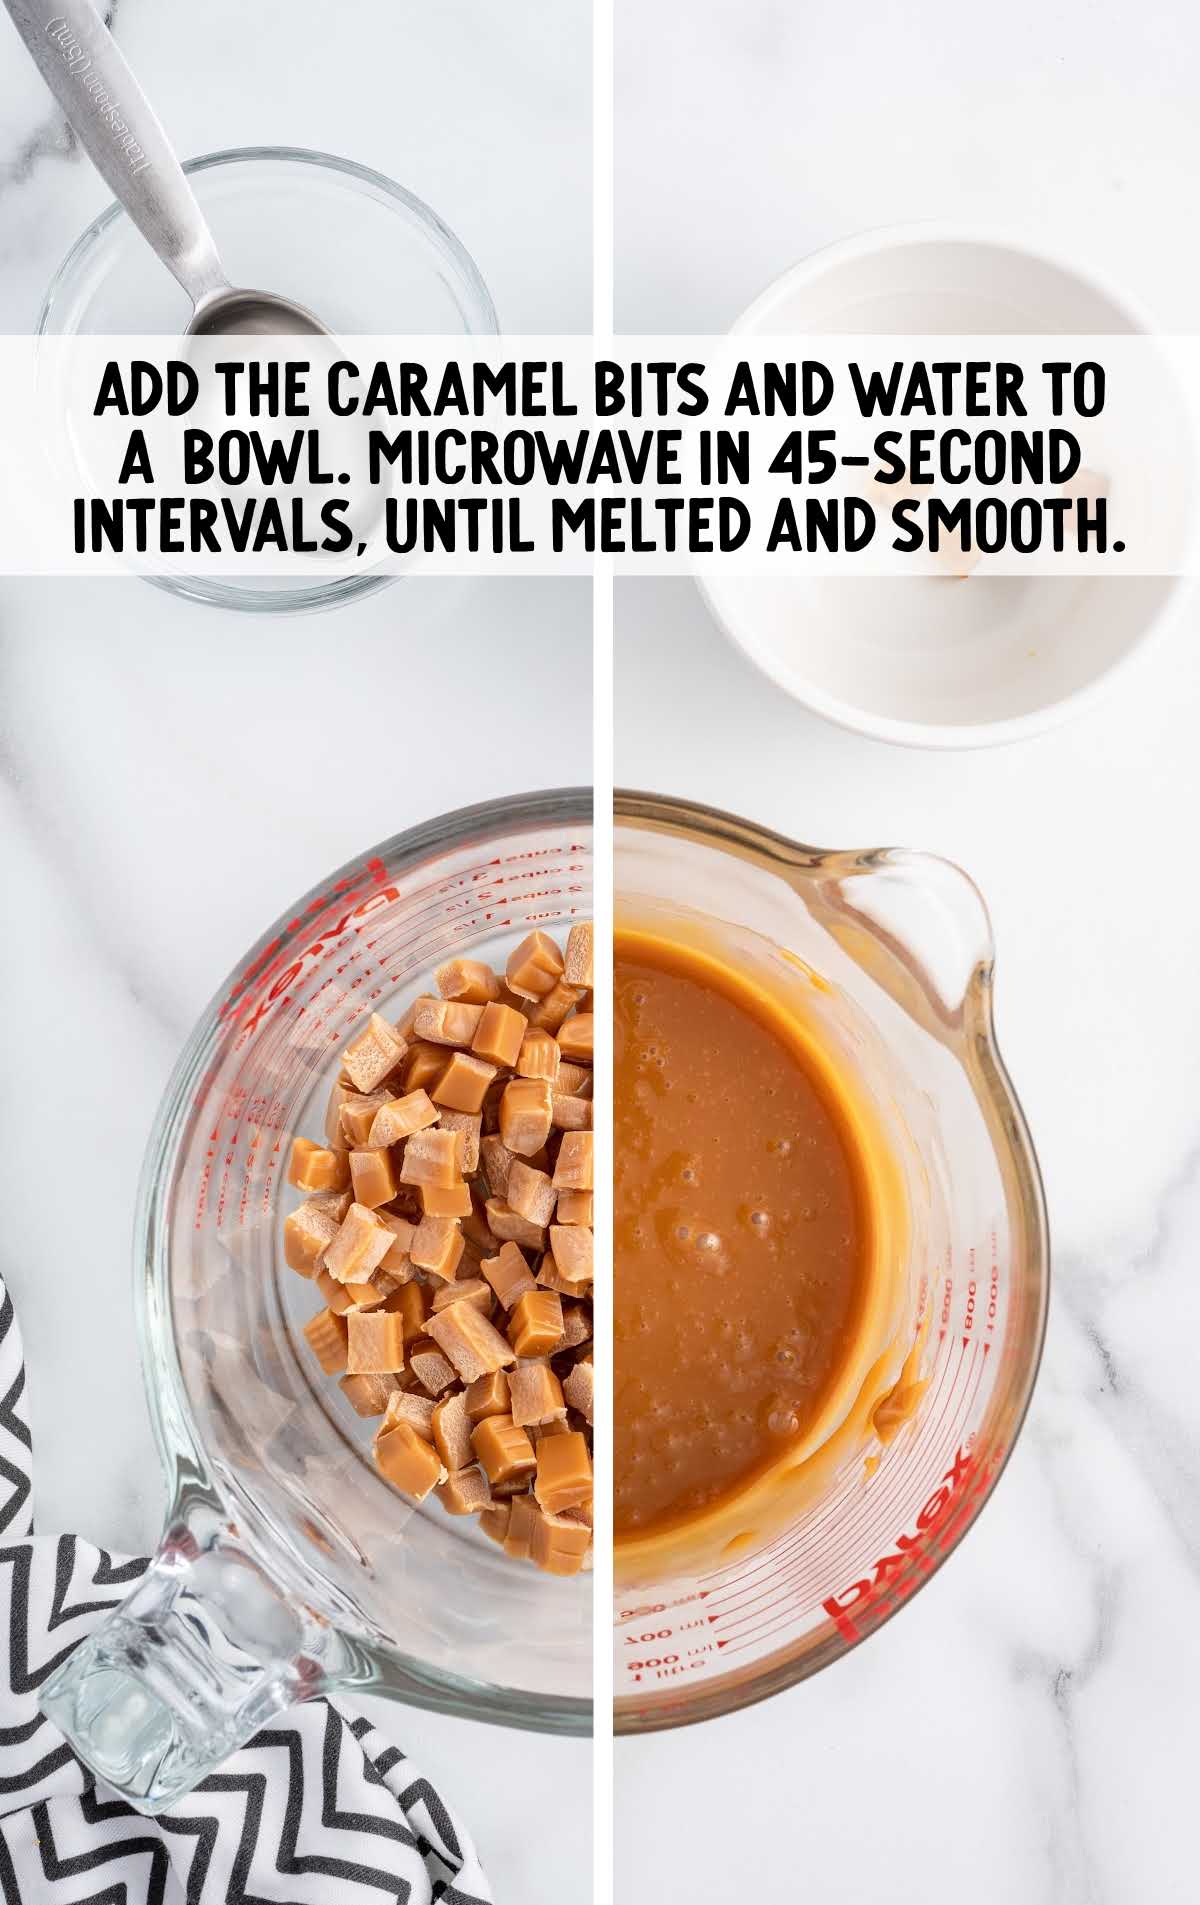 caramel bites and water added to a bowl